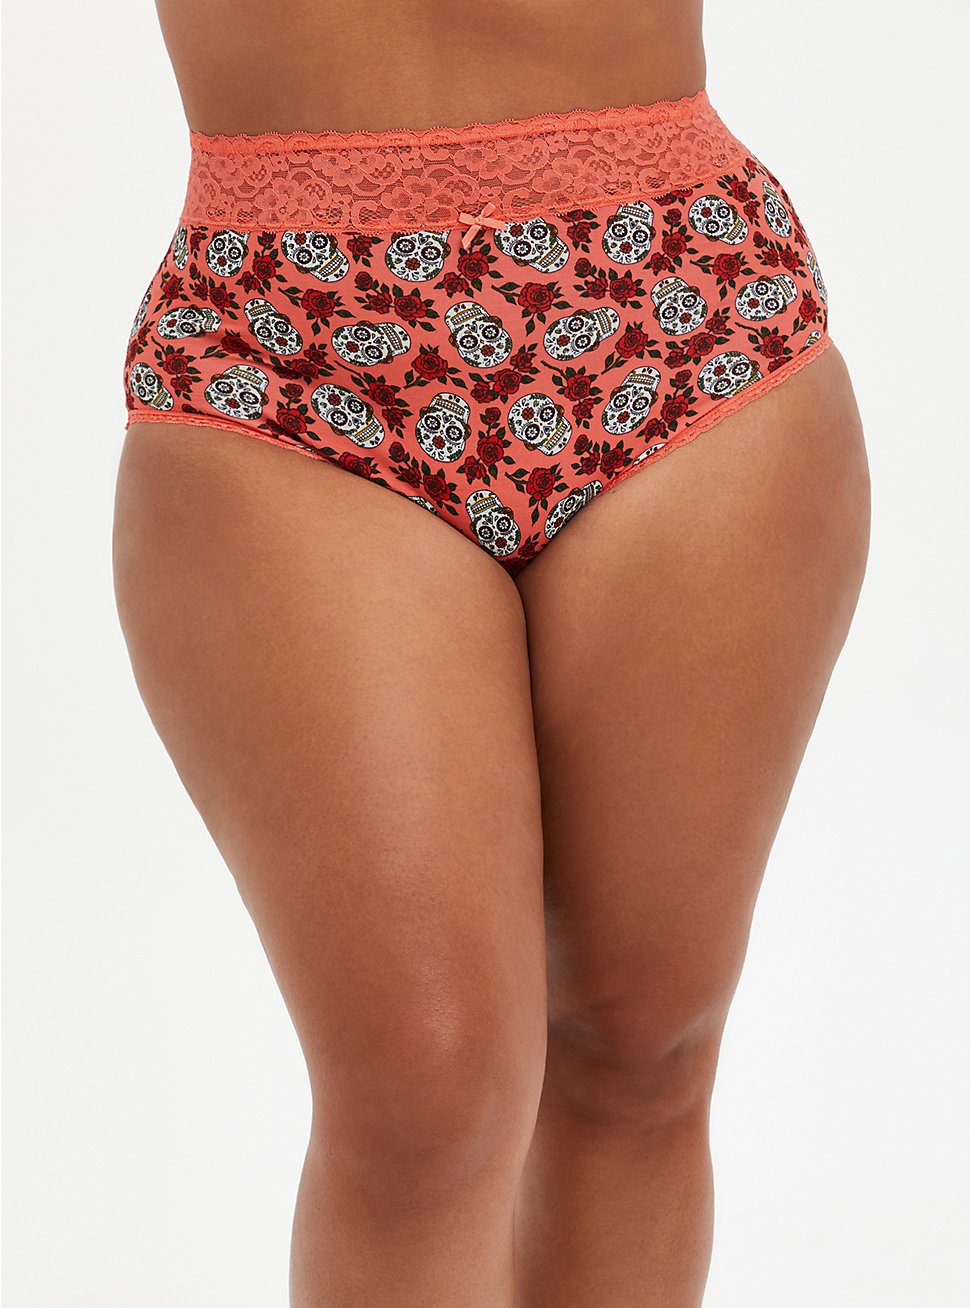 Coral Skull Floral Wide Lace Cotton High Waist Panty, DITSY MUERTOS CORAL, hi-res